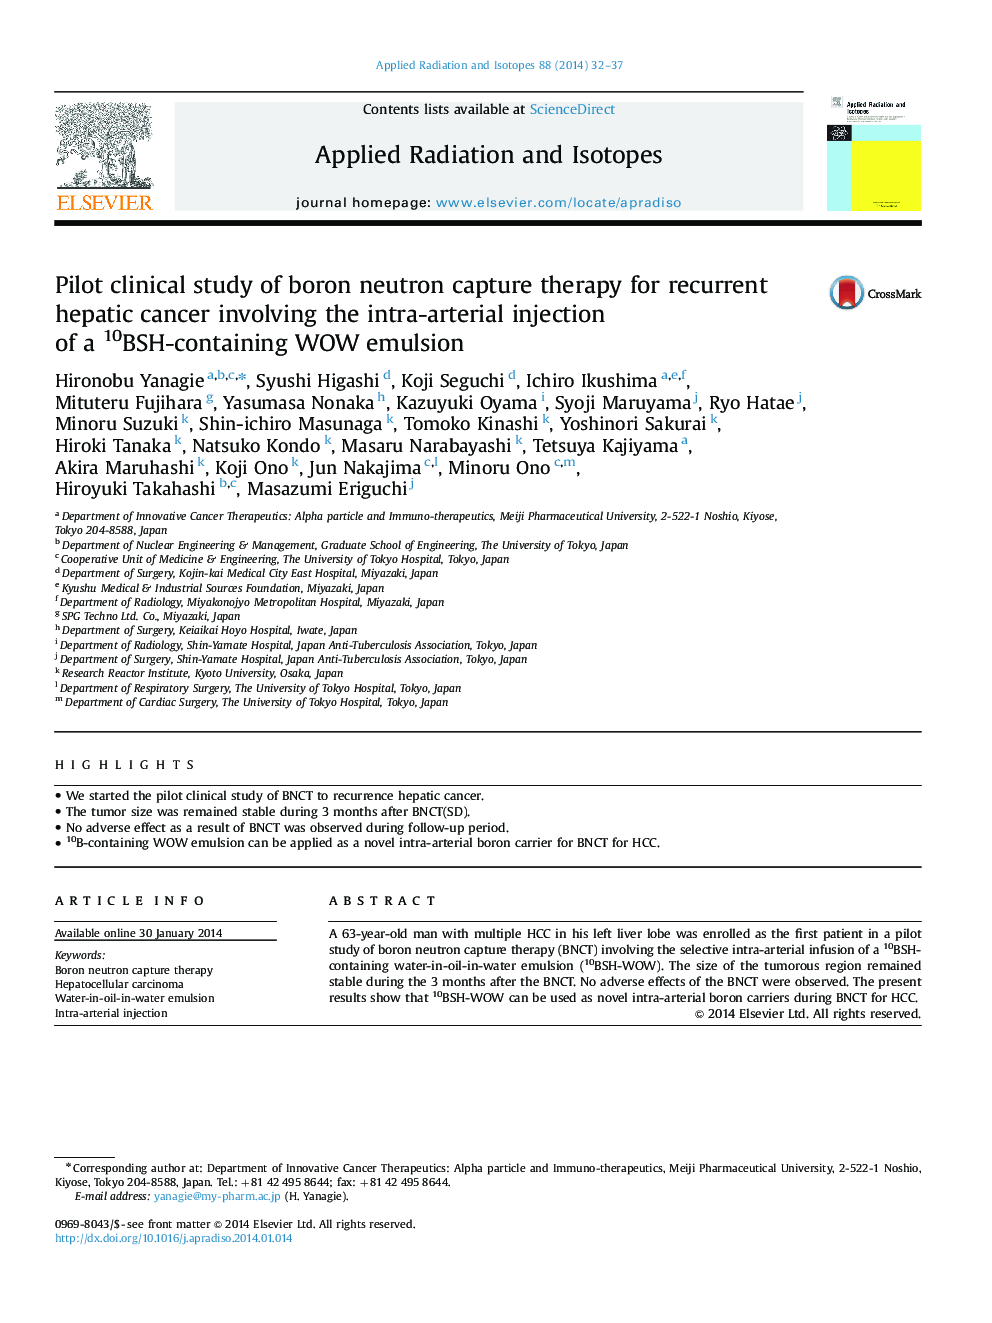 Pilot clinical study of boron neutron capture therapy for recurrent hepatic cancer involving the intra-arterial injection of a 10BSH-containing WOW emulsion